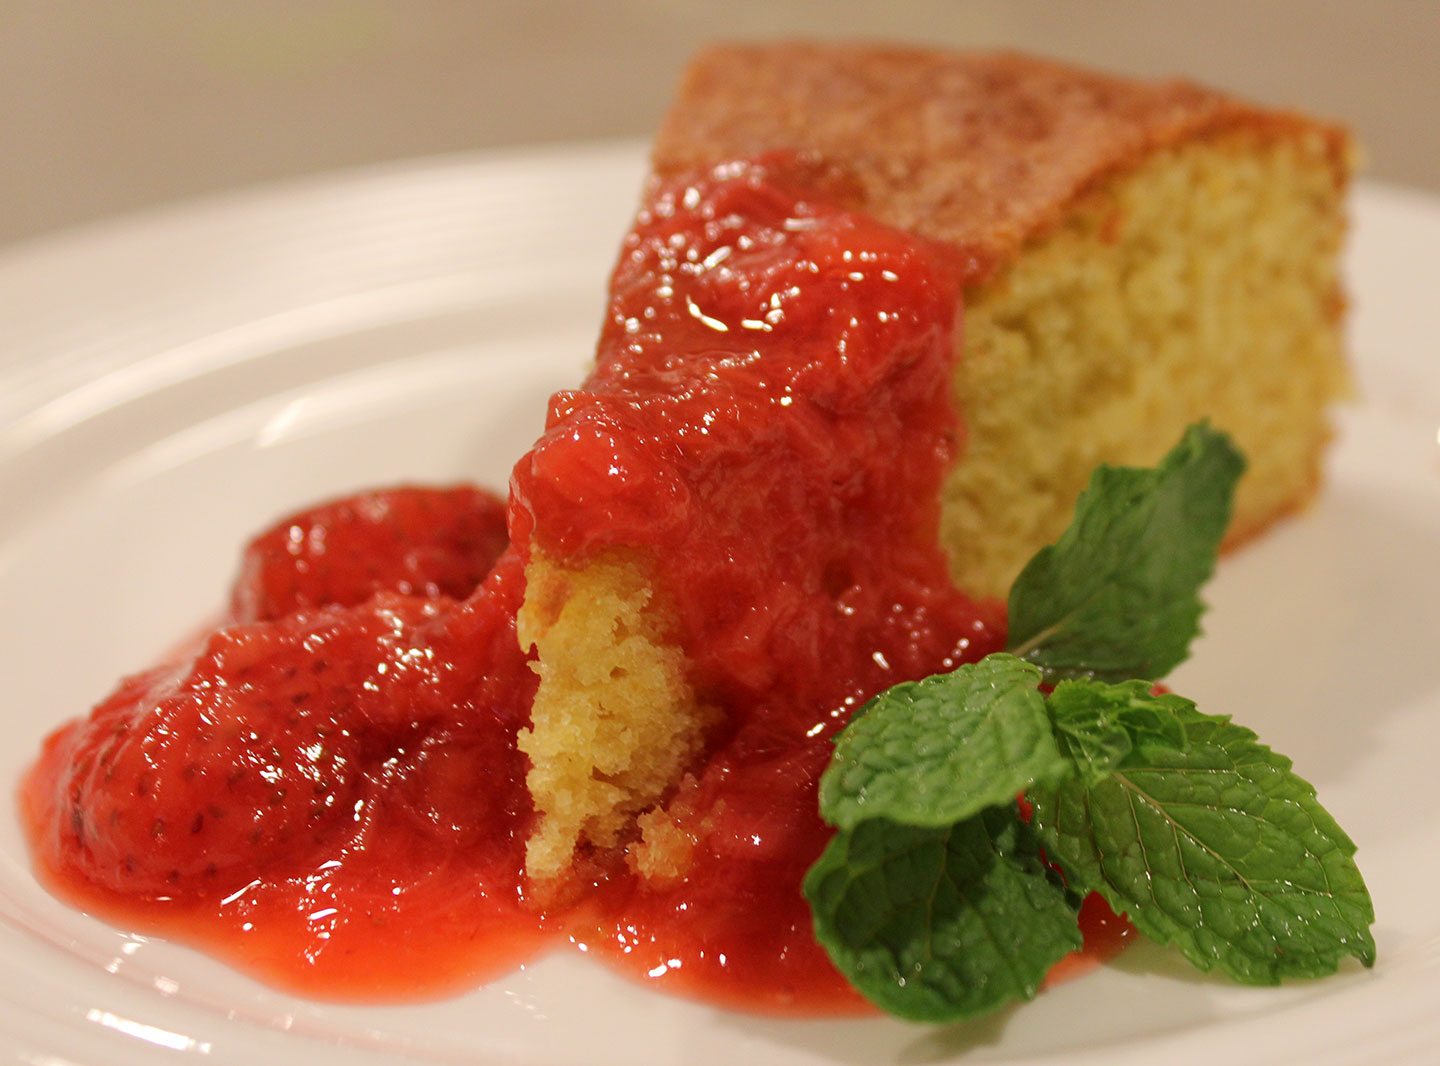 Olive Oil Cake with Strawberry Rhubarb Compote